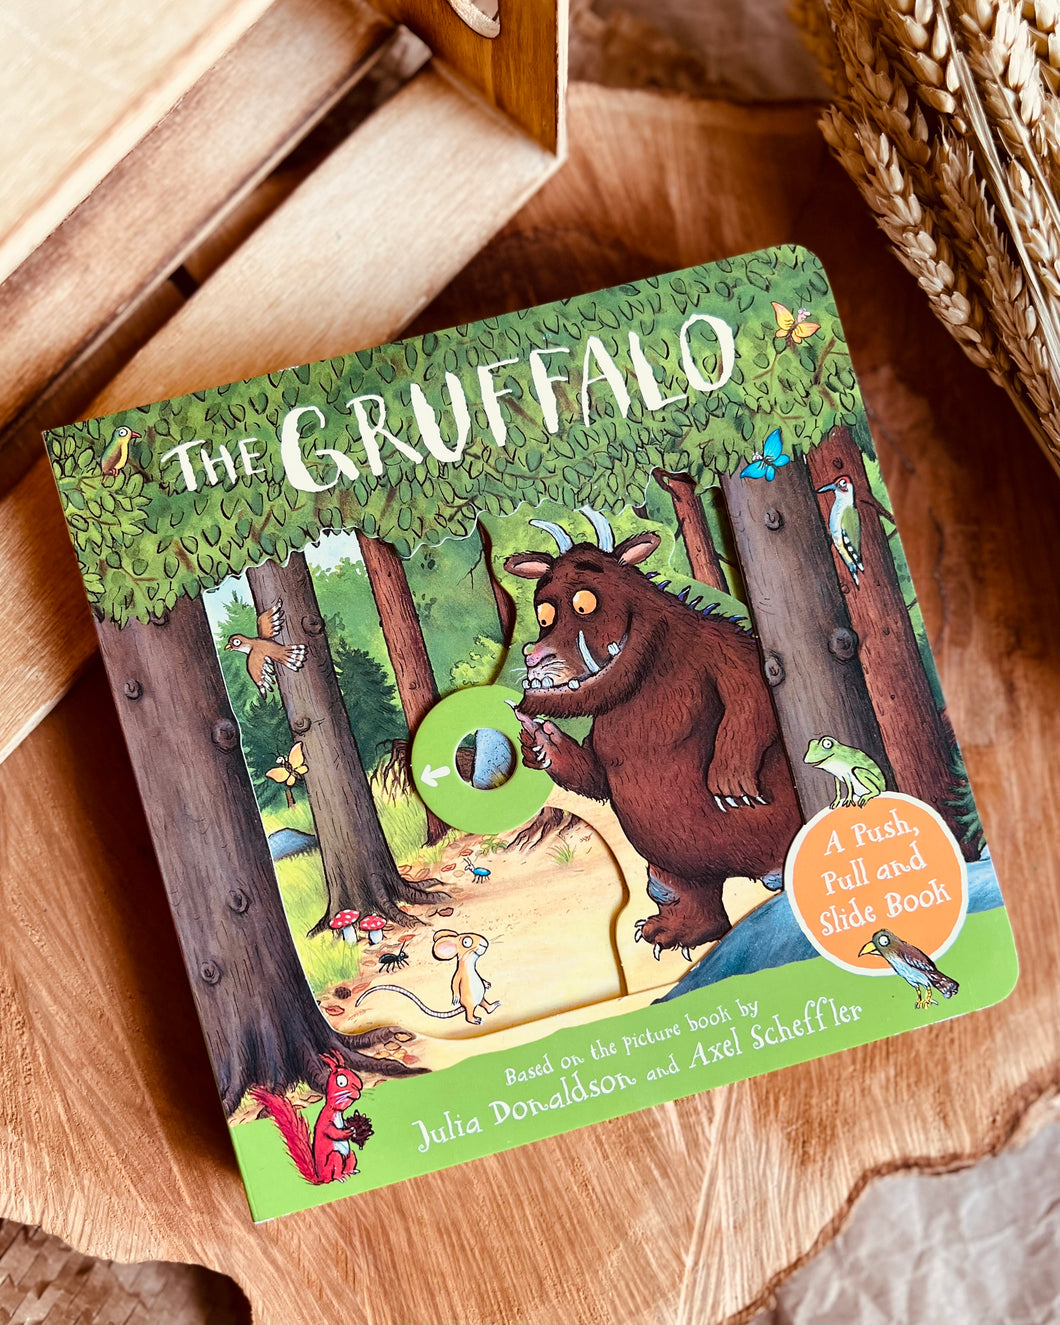 The Gruffalo: A Push, Pull and Slide Book